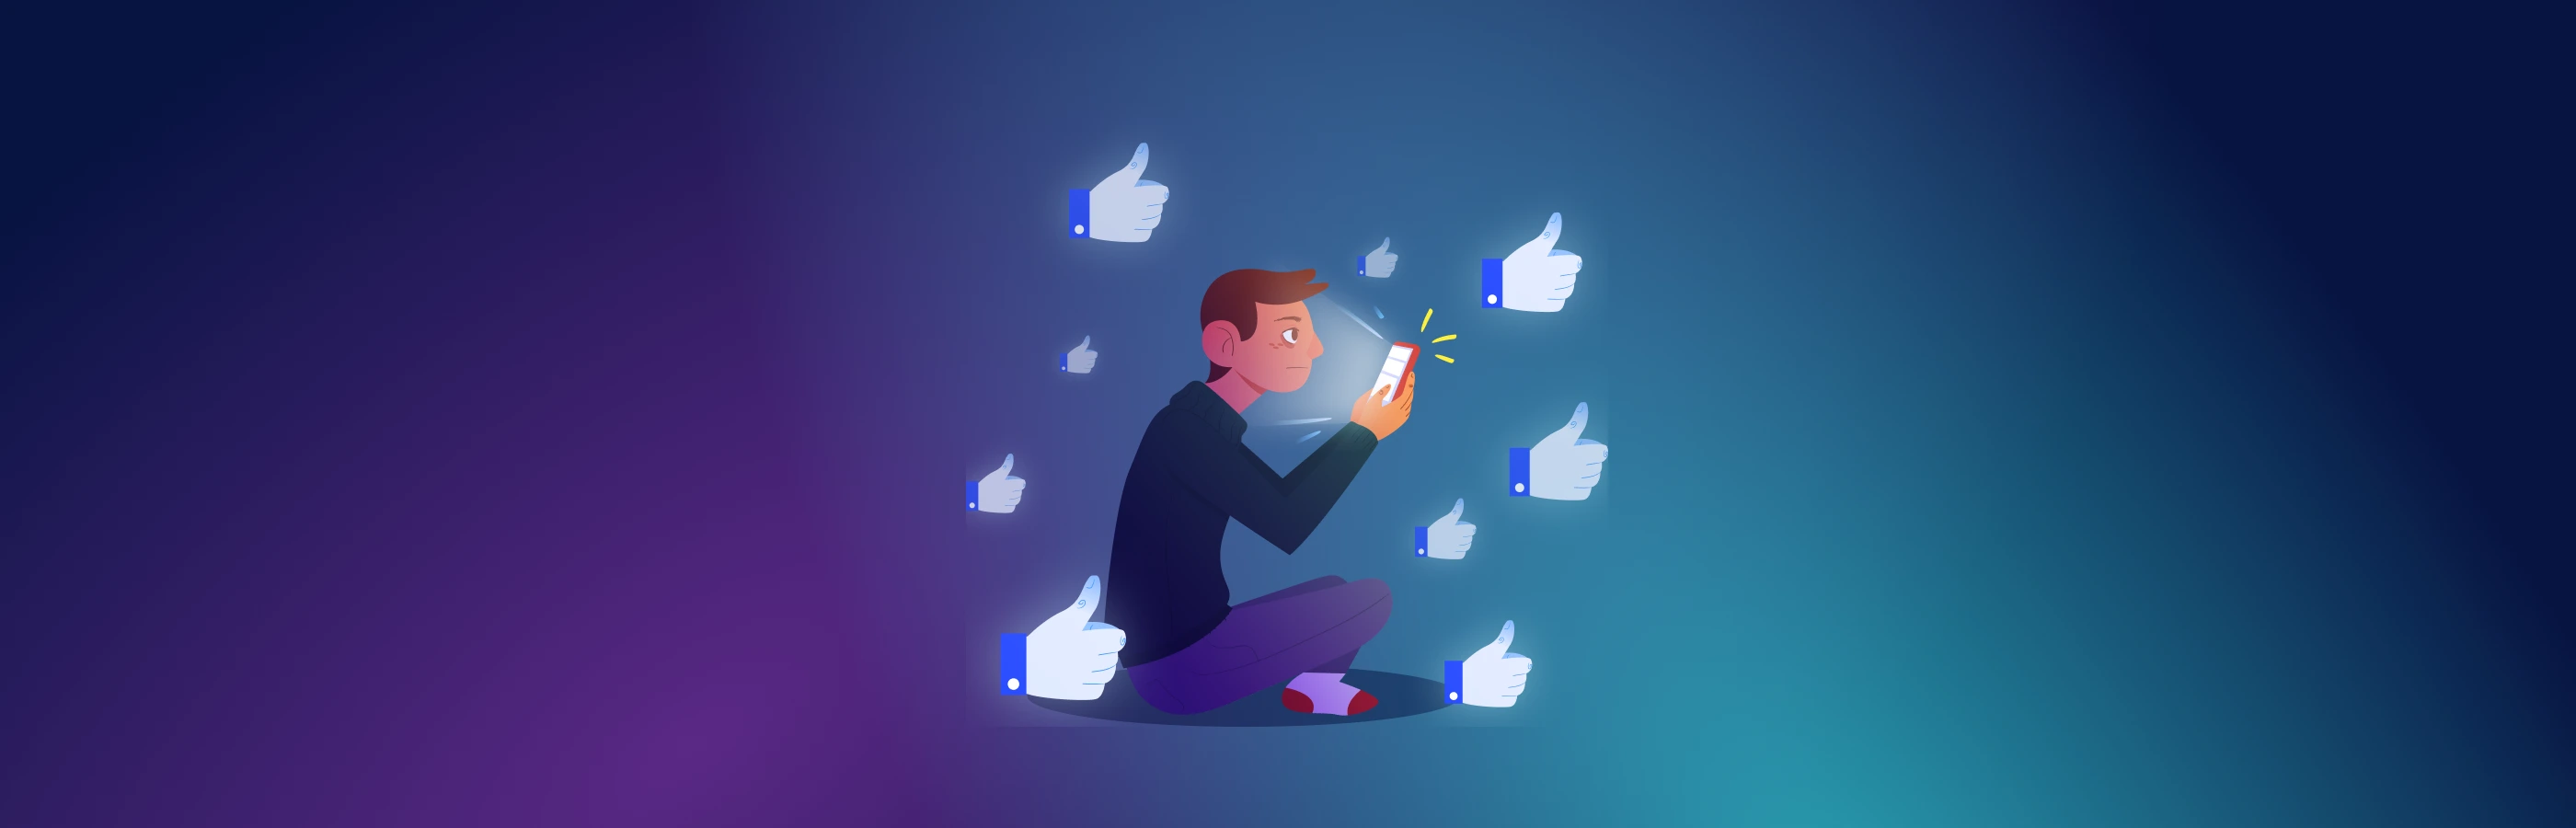 How to Extend the Life of Facebook Accounts: Warm-up, Content, Advertising